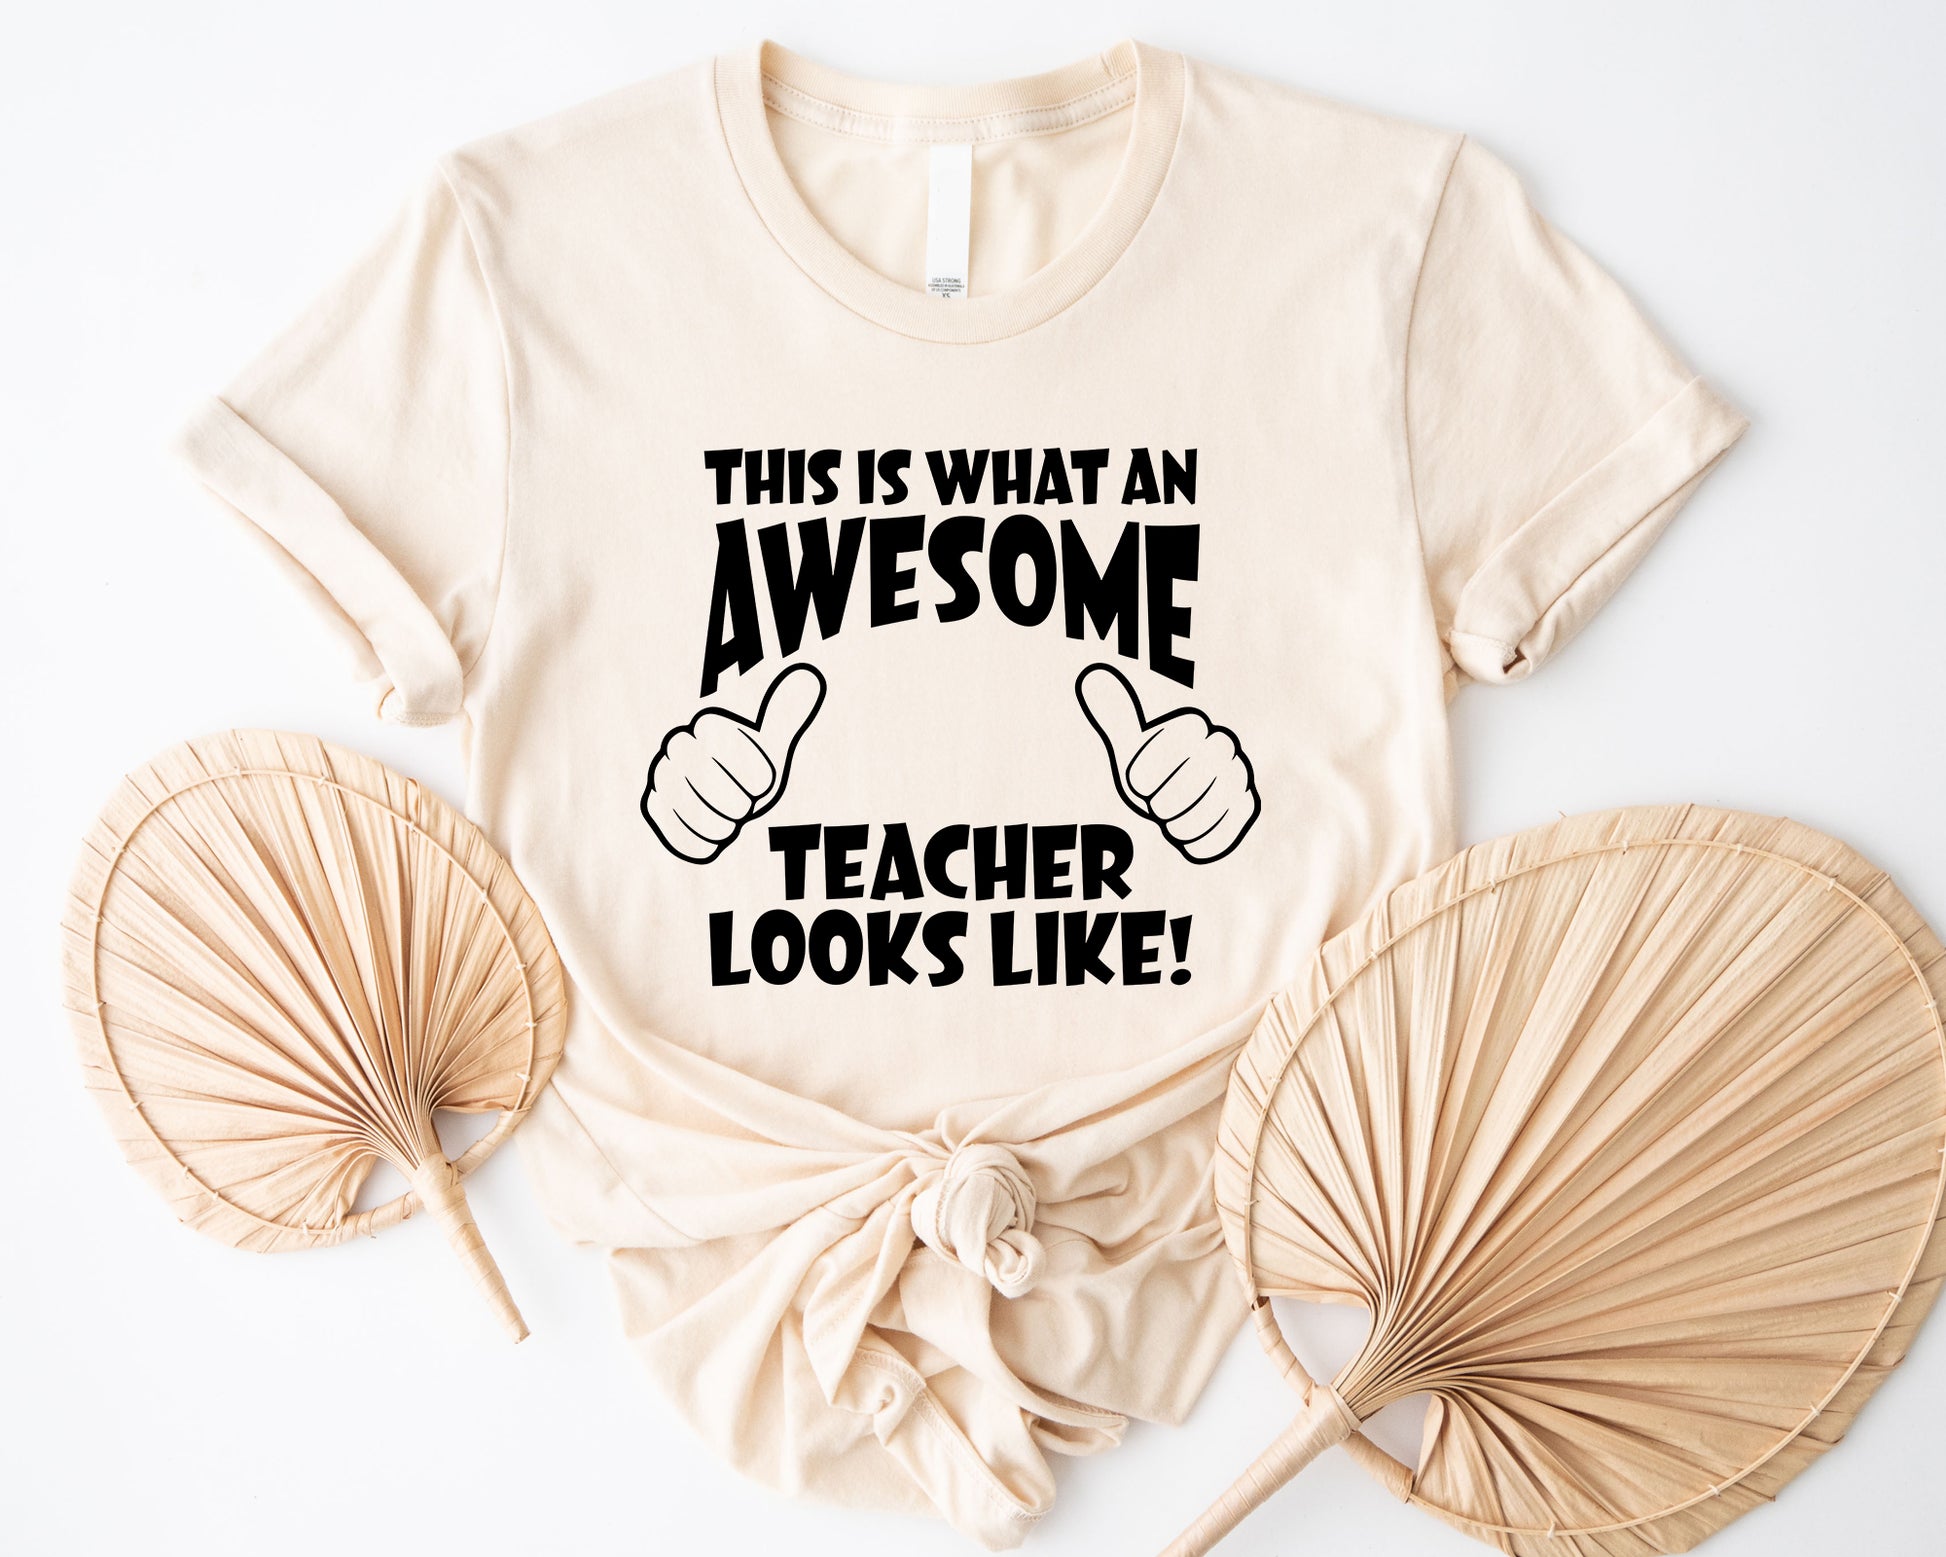 This Is An Awesome Teacher Looks Like Personalized Tee | Back To School Customized T-shirts | Funny Quote Teacher T-shirt - Natural